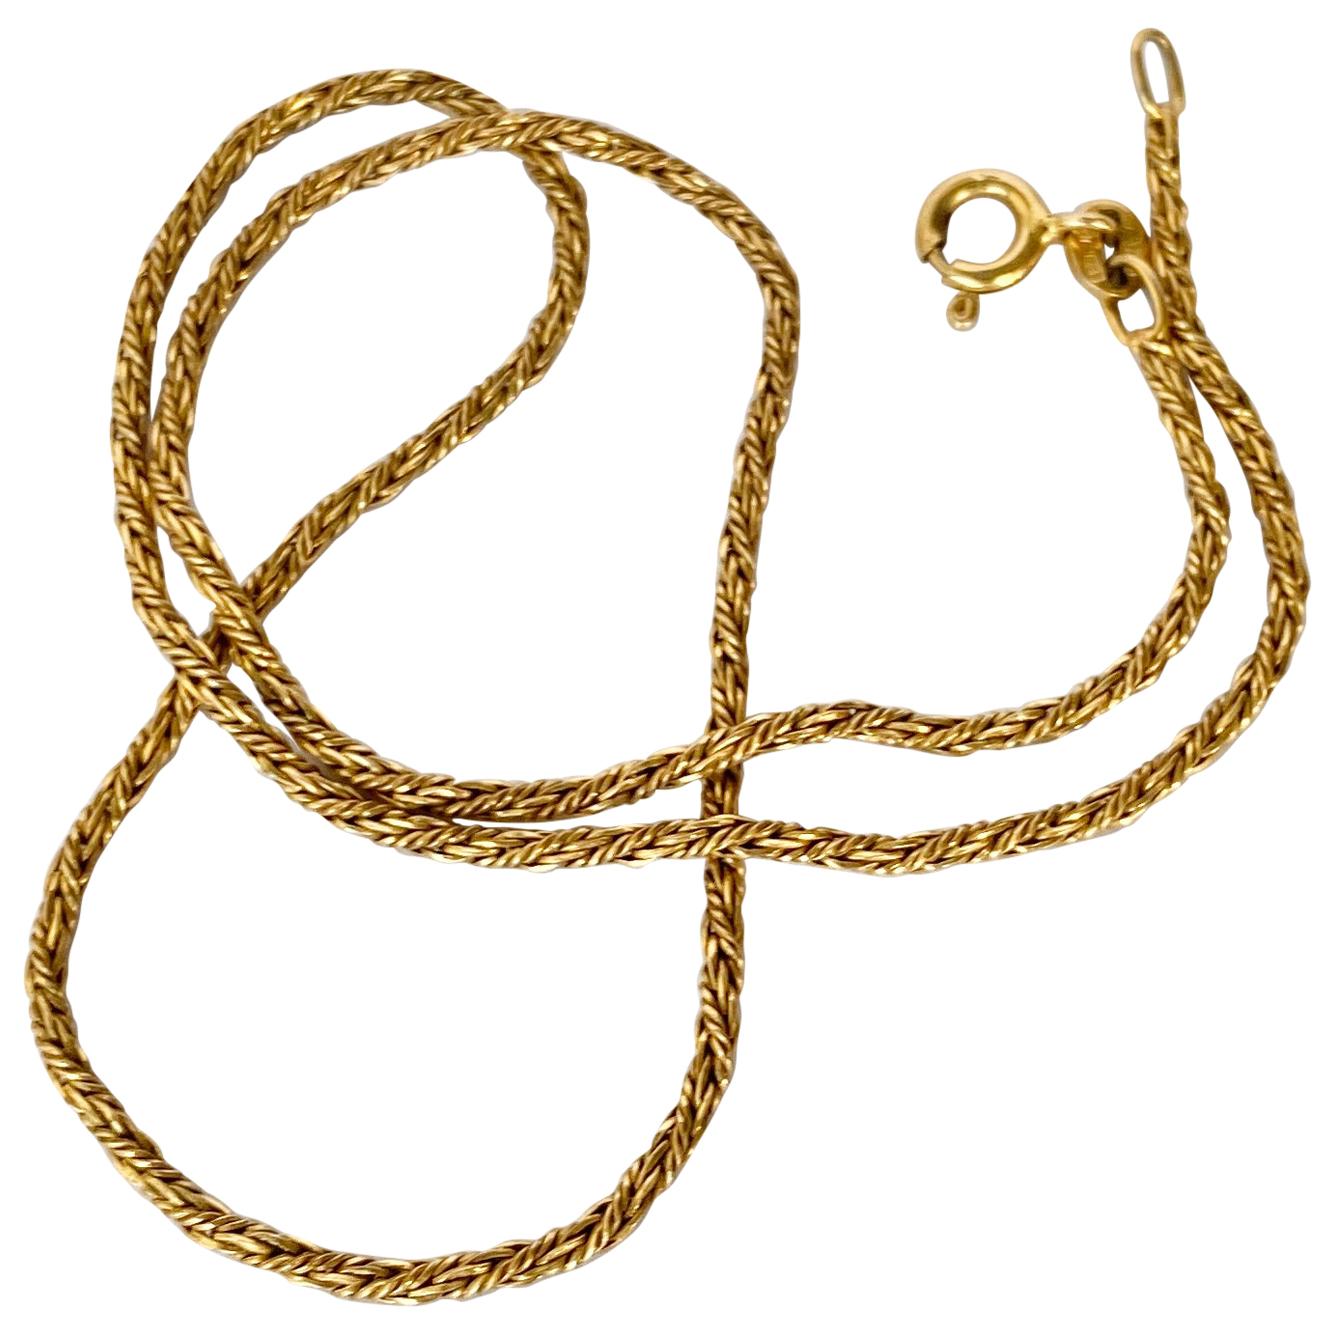 Victorian 9 Carat Gold Rope Twist Link Necklace